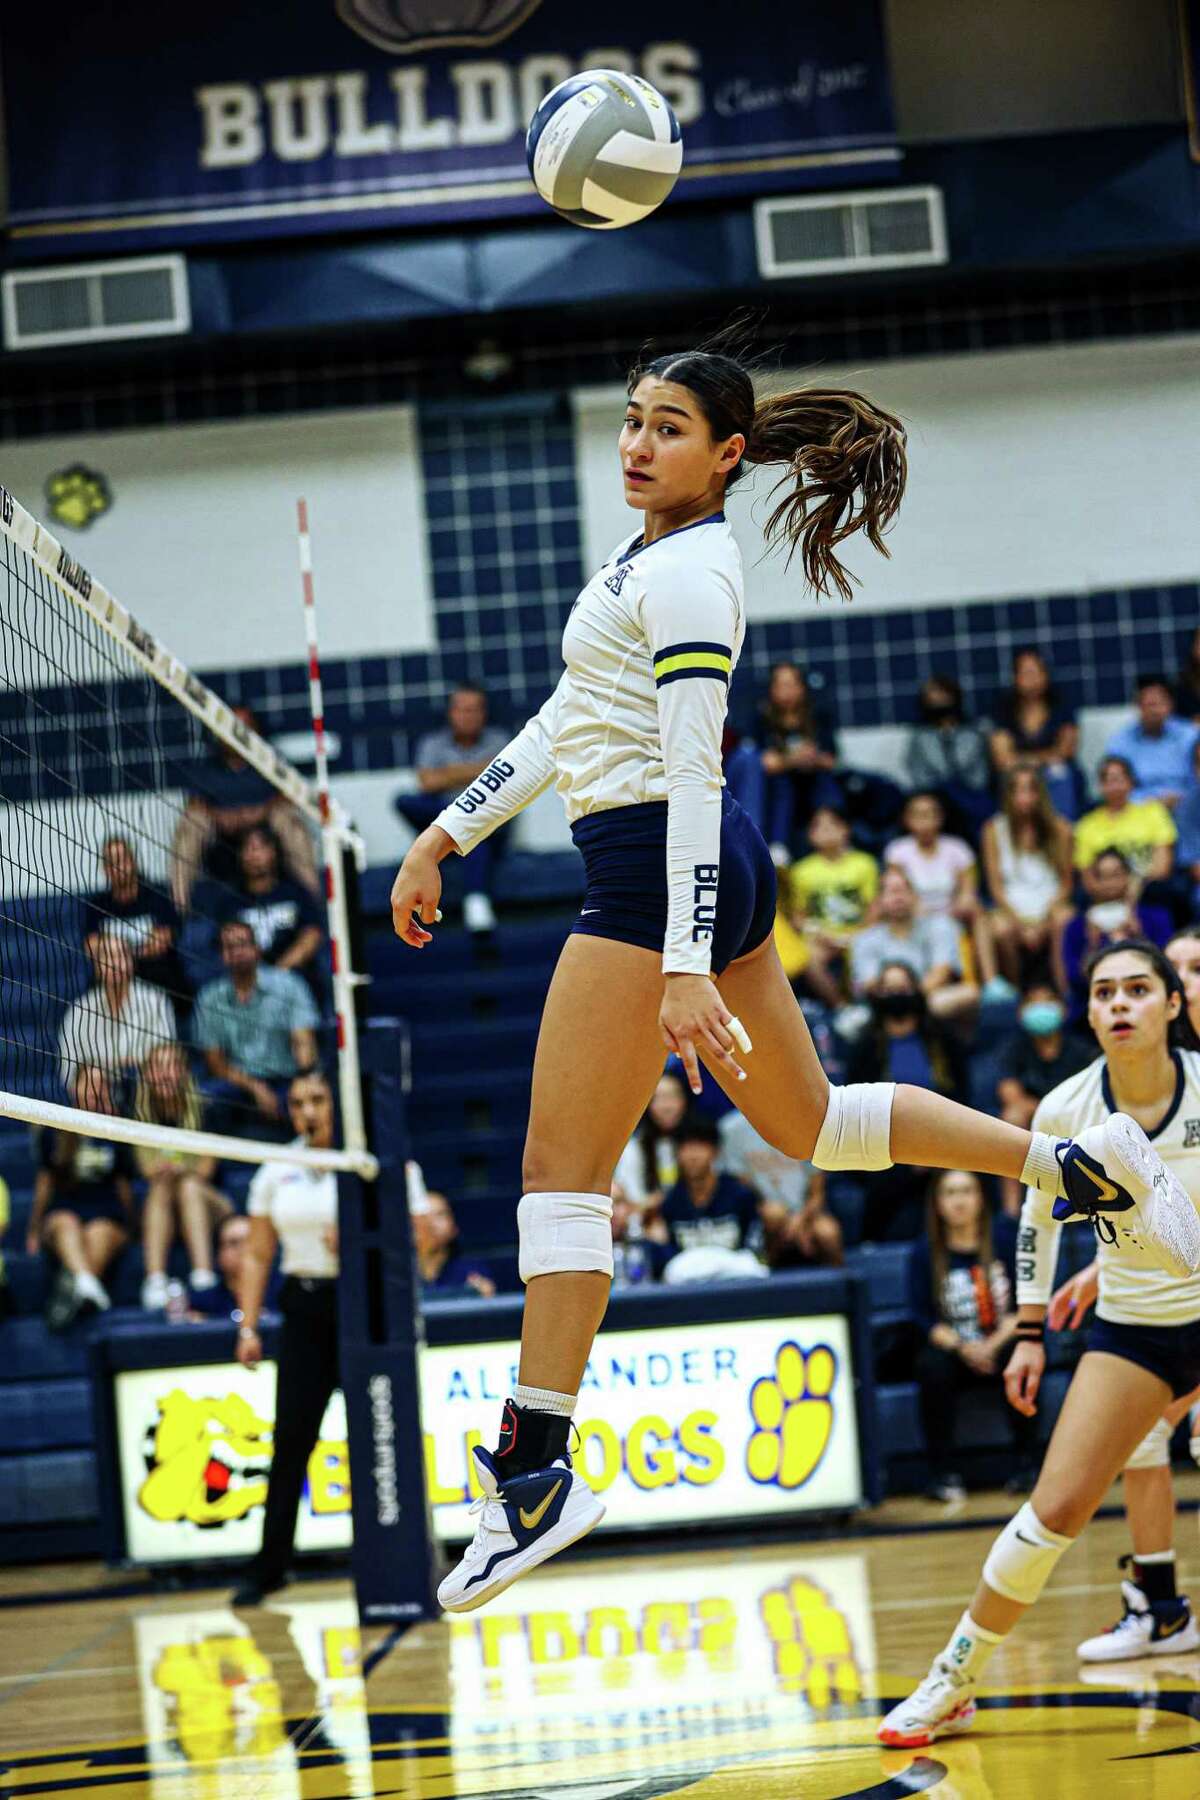 Andrea Nunez and the Alexander Lady Bulldogs opened the season with a win Tuesday.